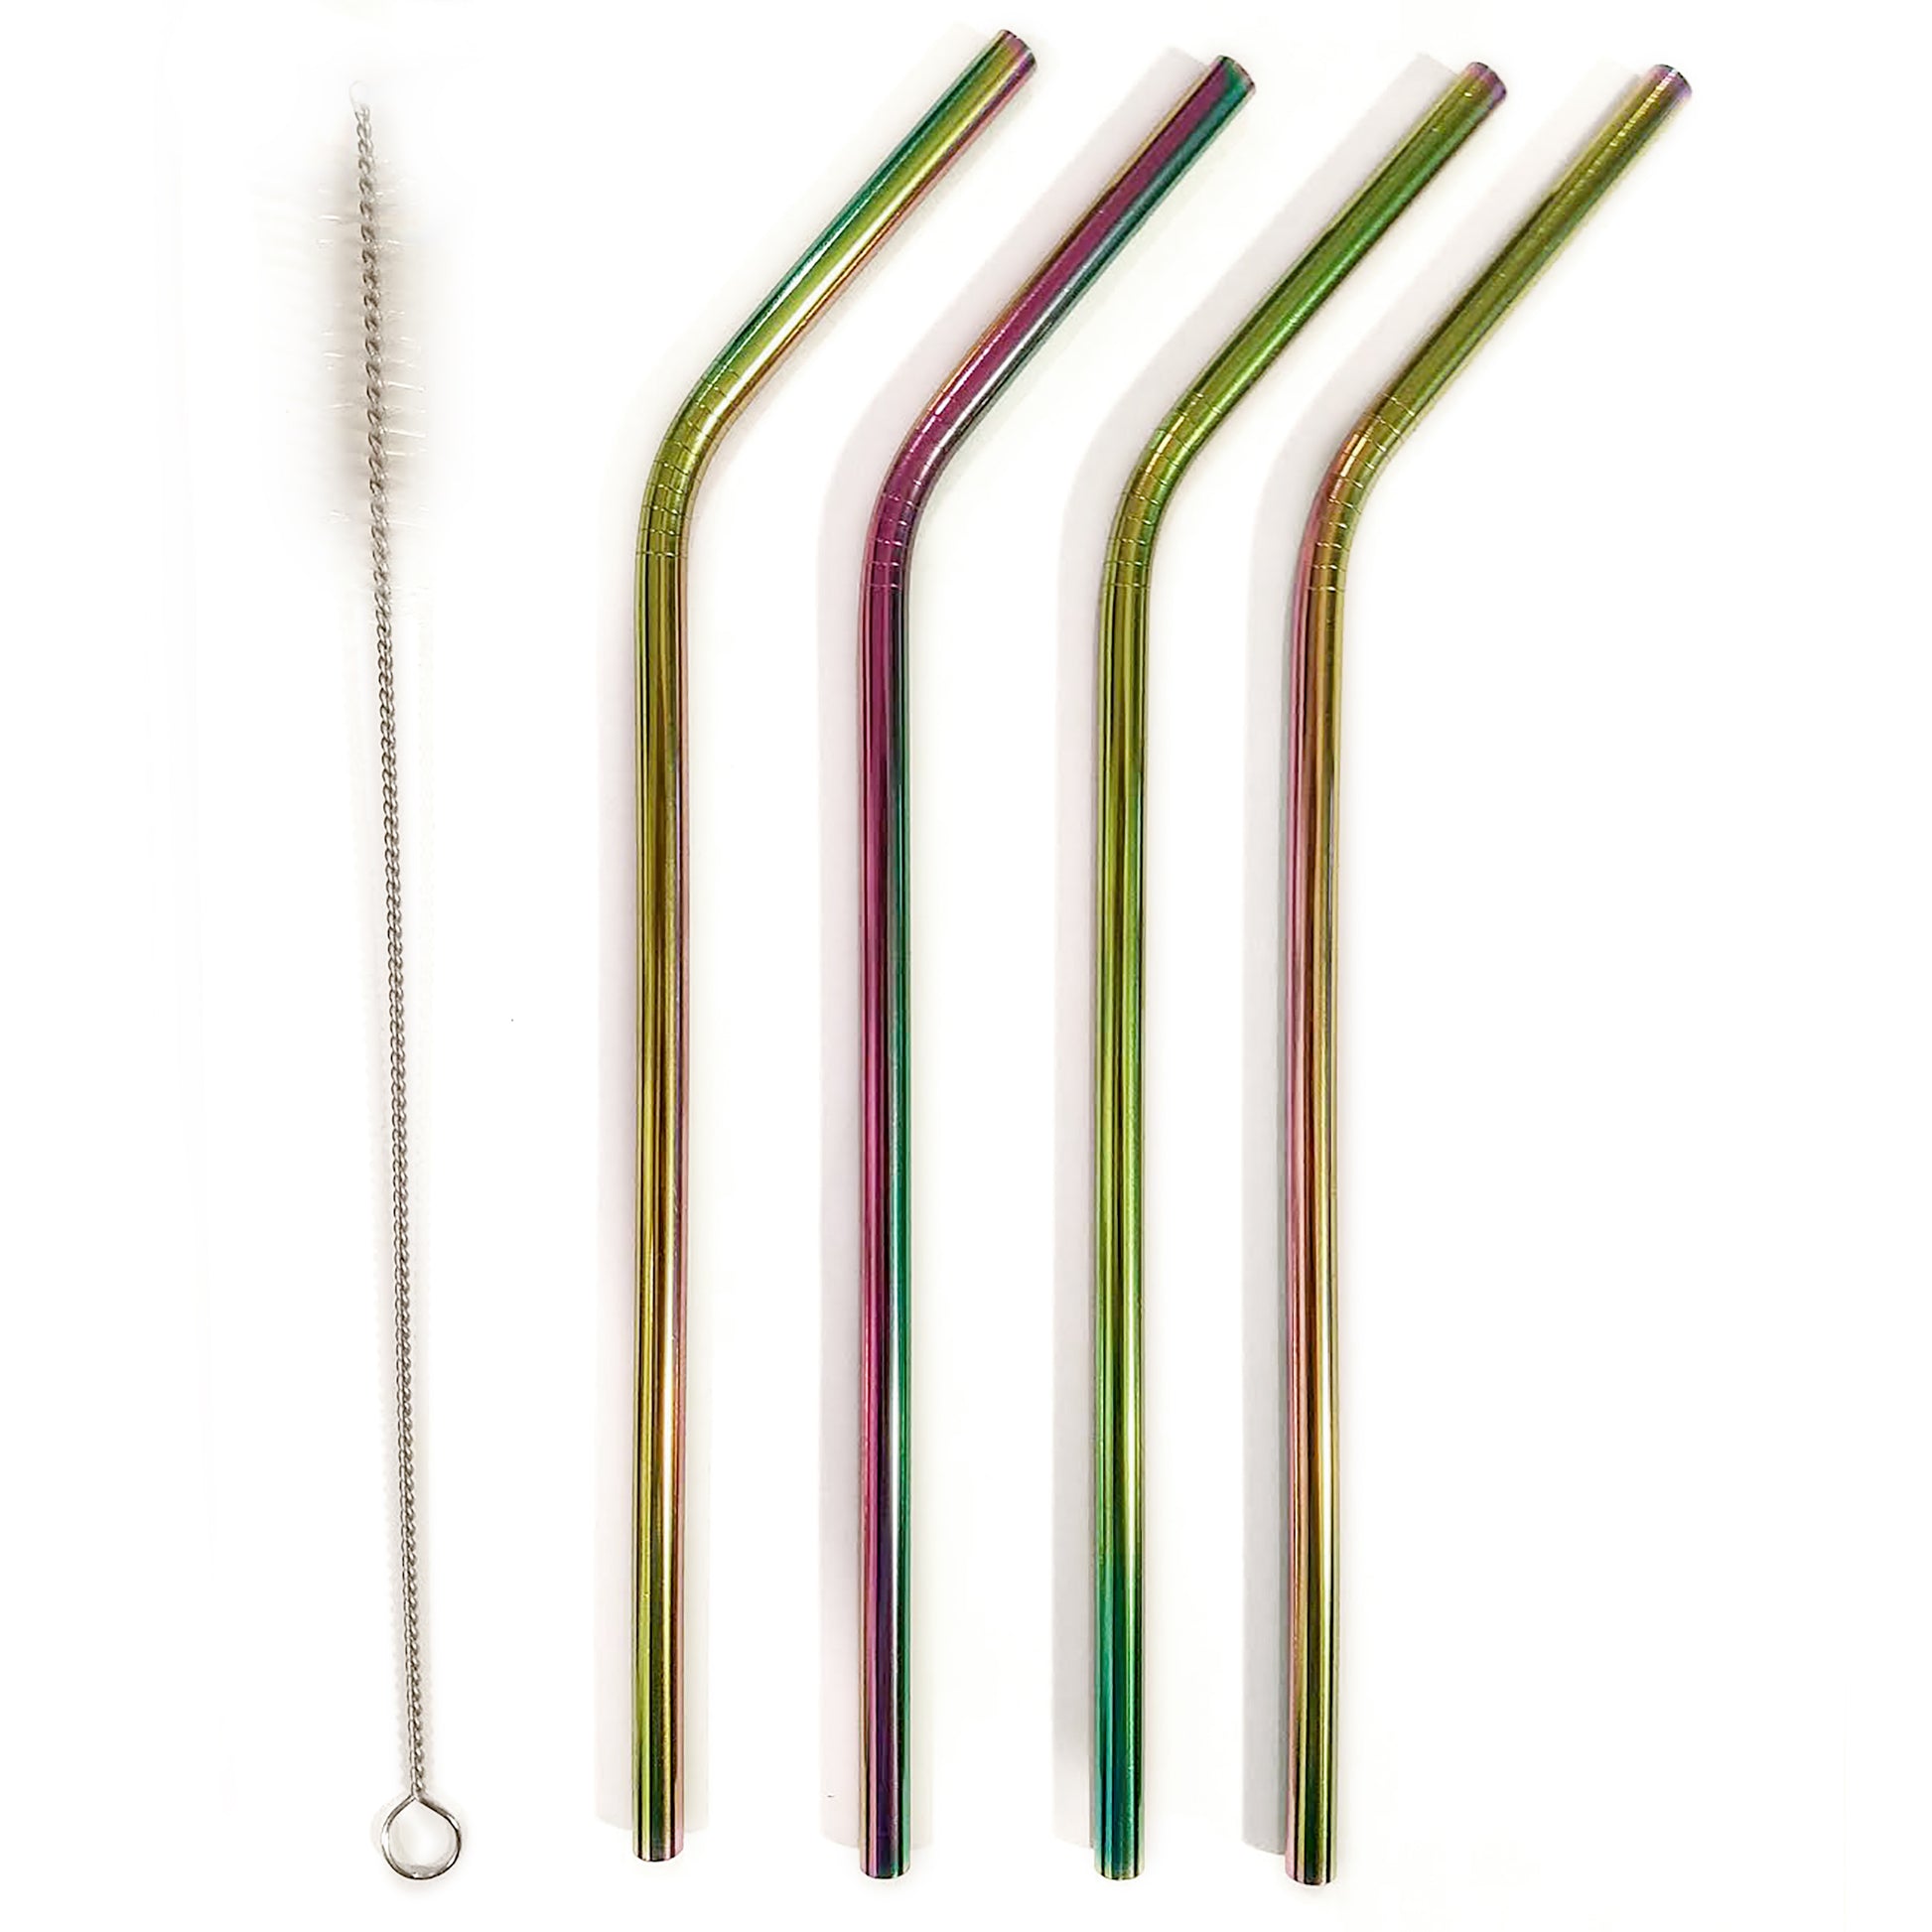 4 Stainless Steel Reusable Drinking Straws + Brush + Pouch, Drinking Straws, HEED THE HUM